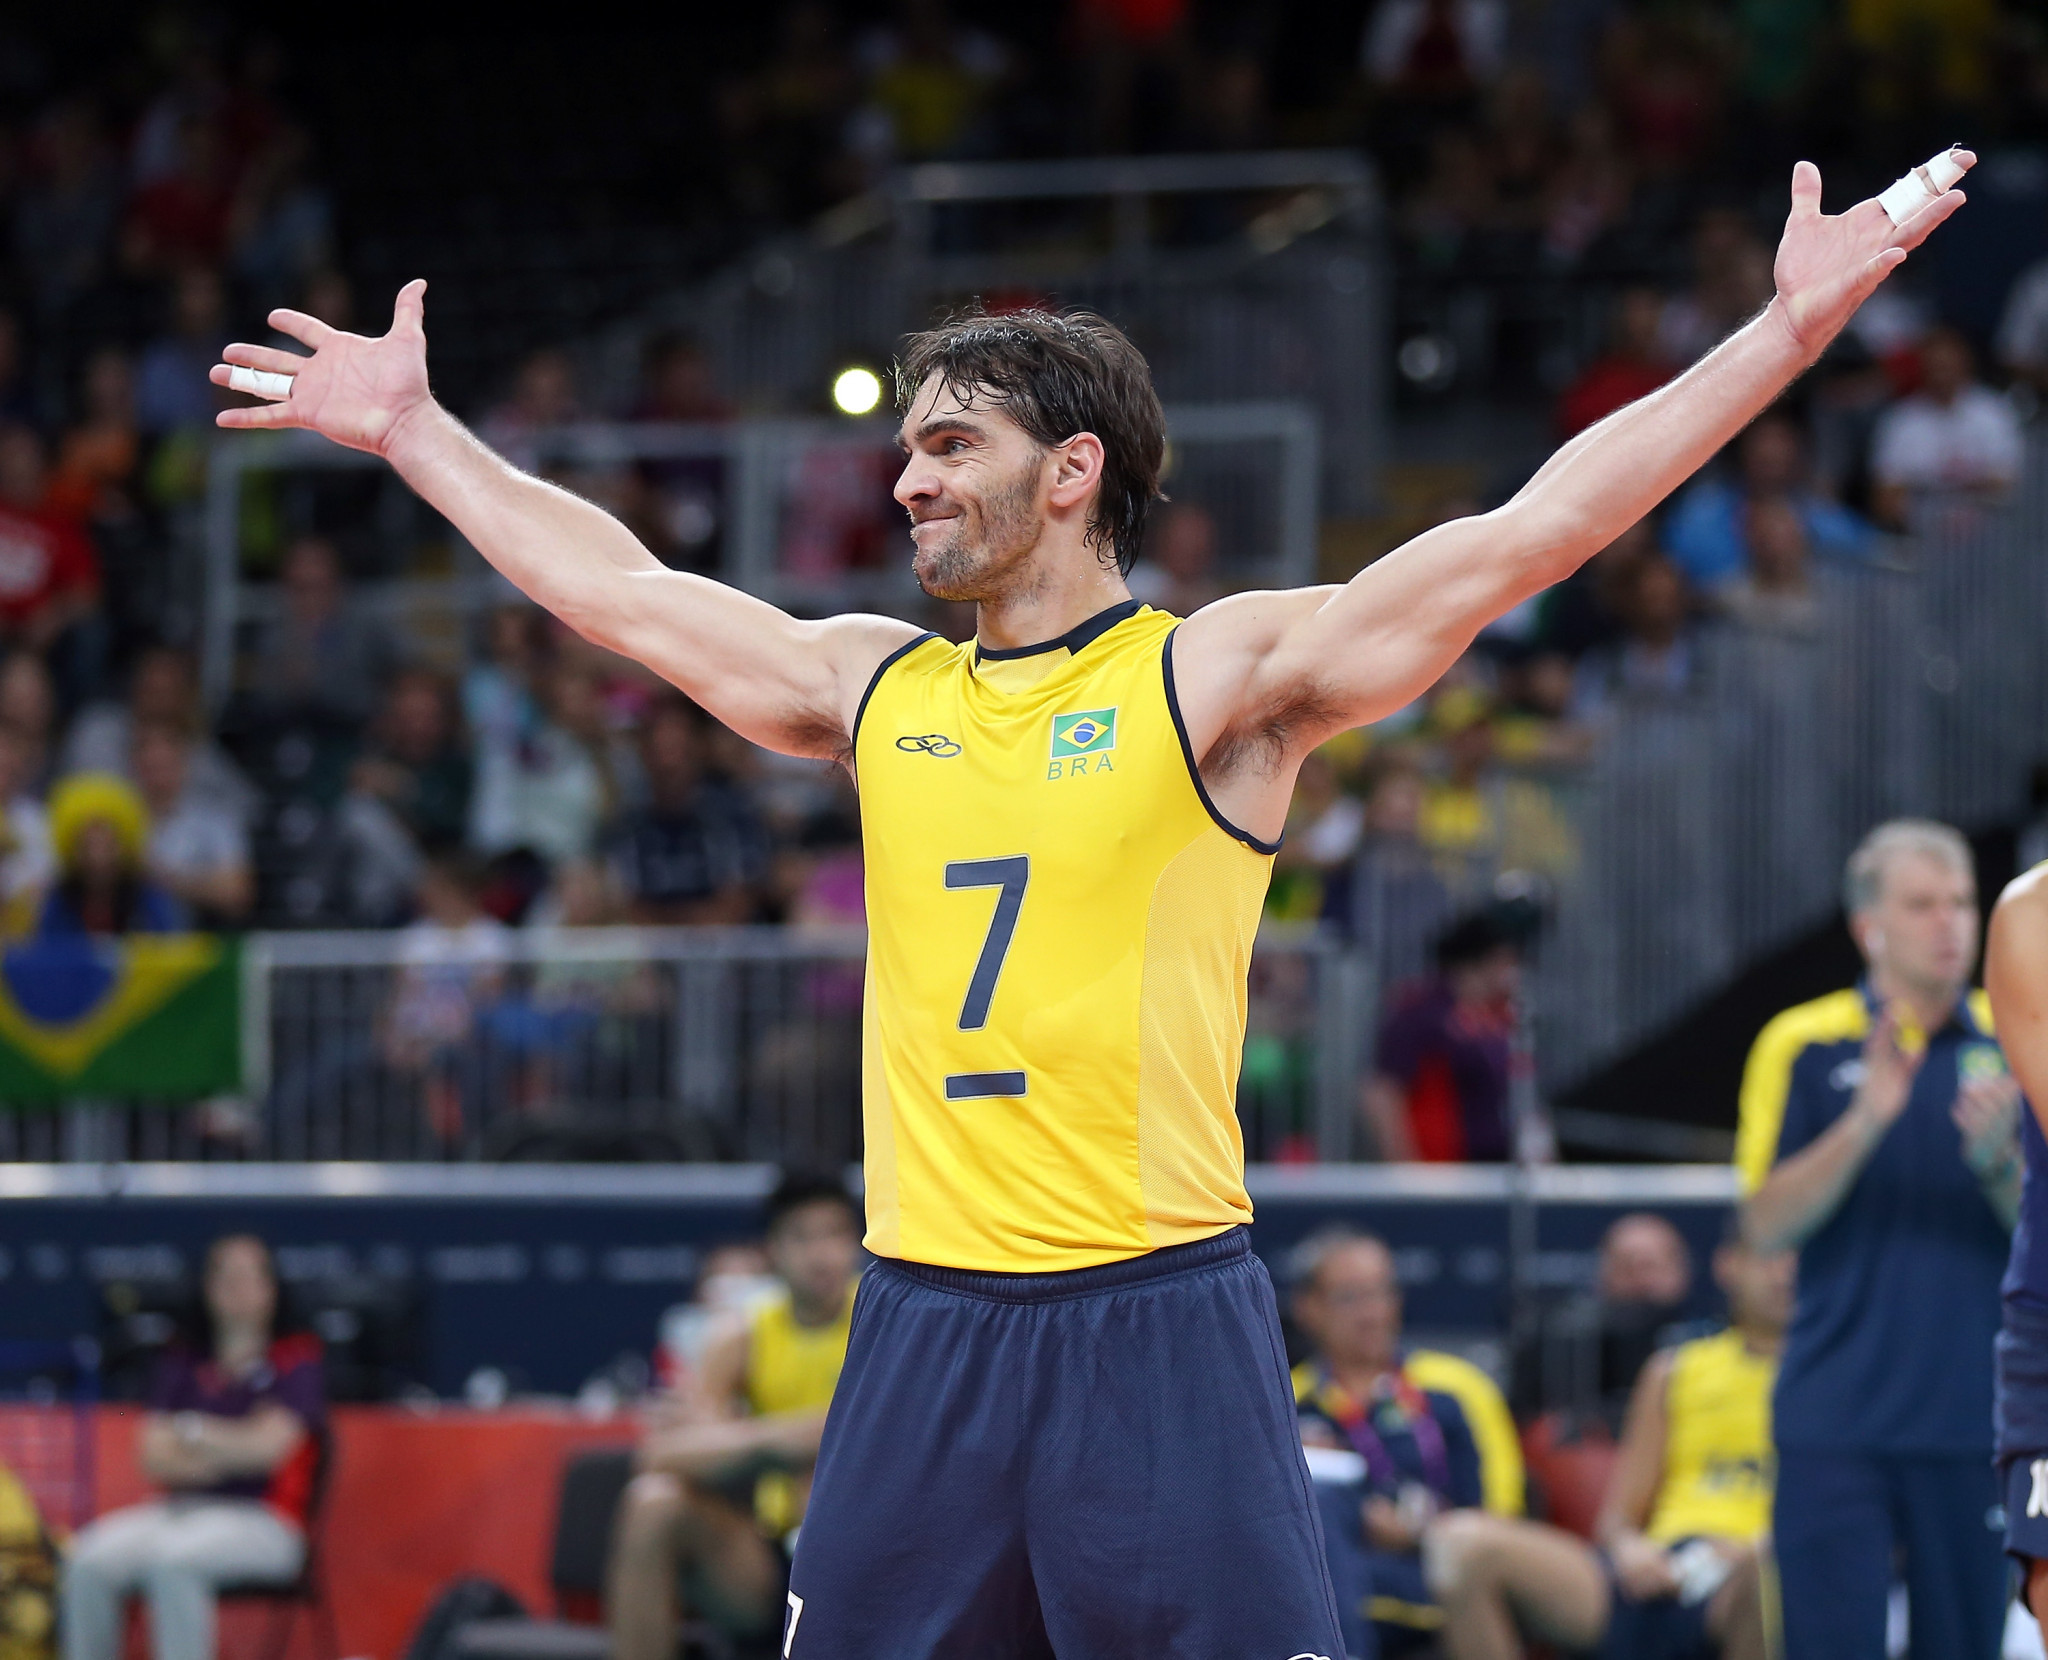 Brazilian legend Giba will be one of the names on court when the inaugural Snow Volleyball World Tour begins tomorrow in Austria ©Getty Images